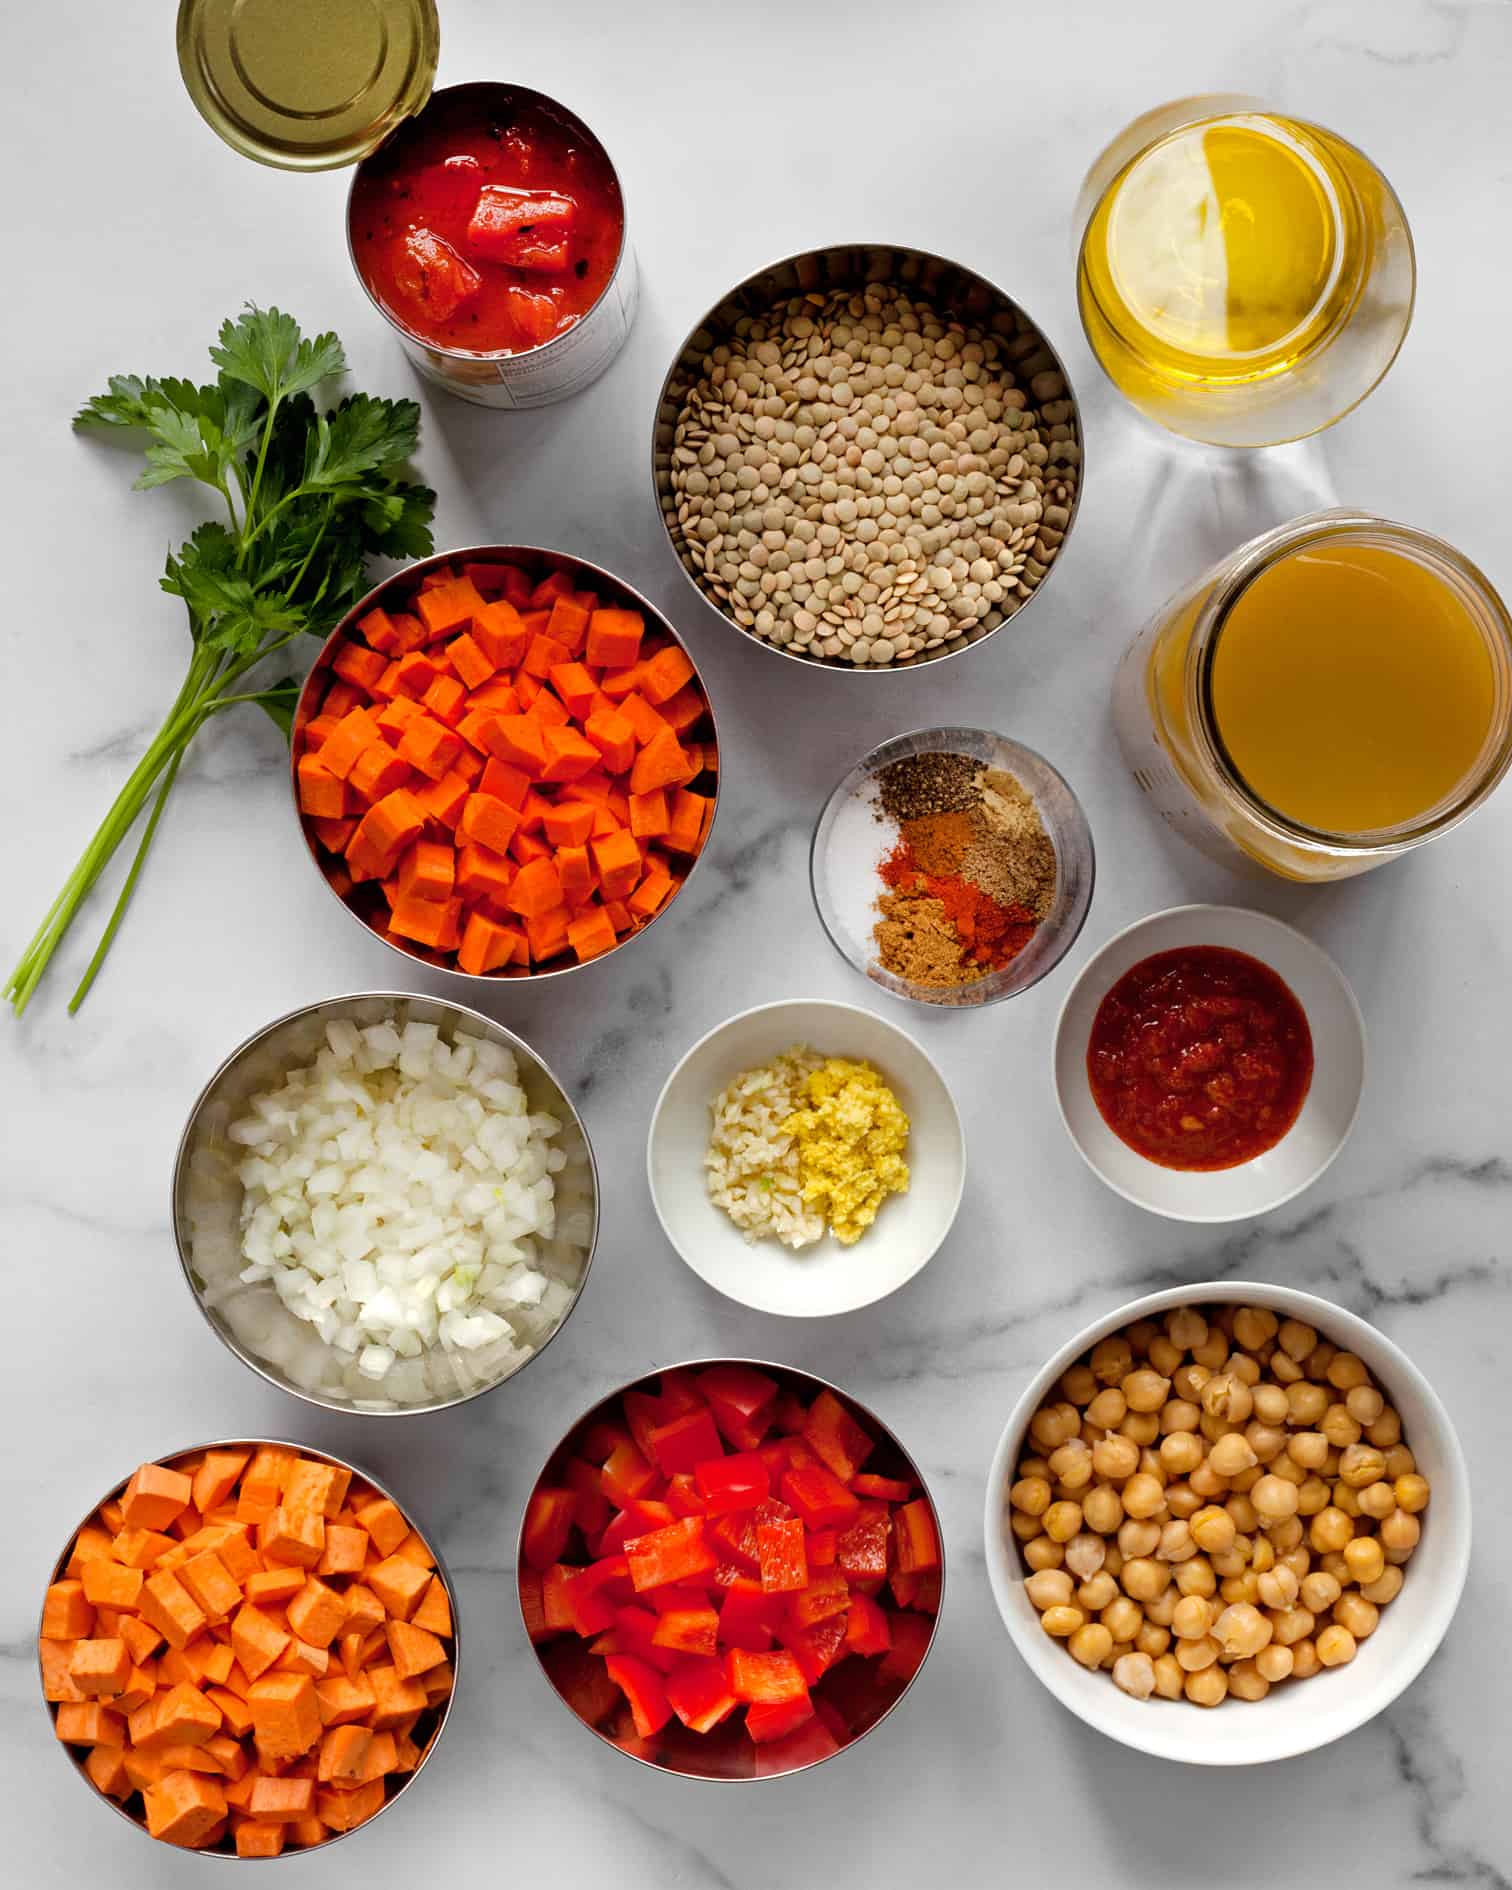 Ingredients including chickpeas, sweet potatoes, peppers, lentils, chickpeas and tomatoes